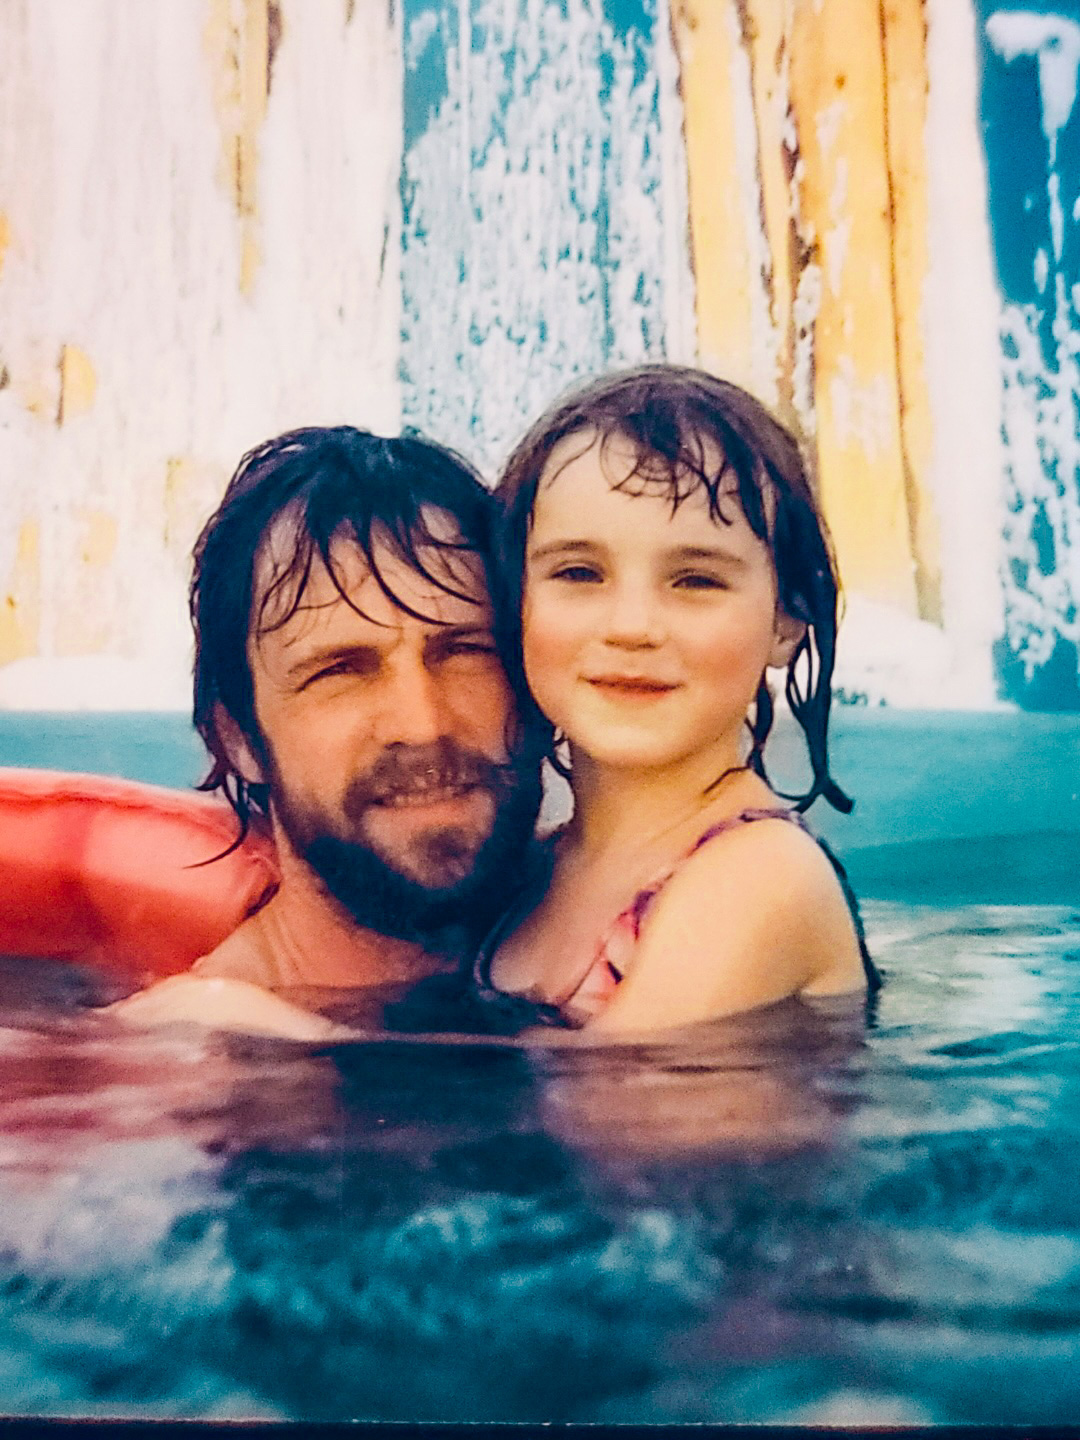 A bearded man holds a young girl in a swimming pool.